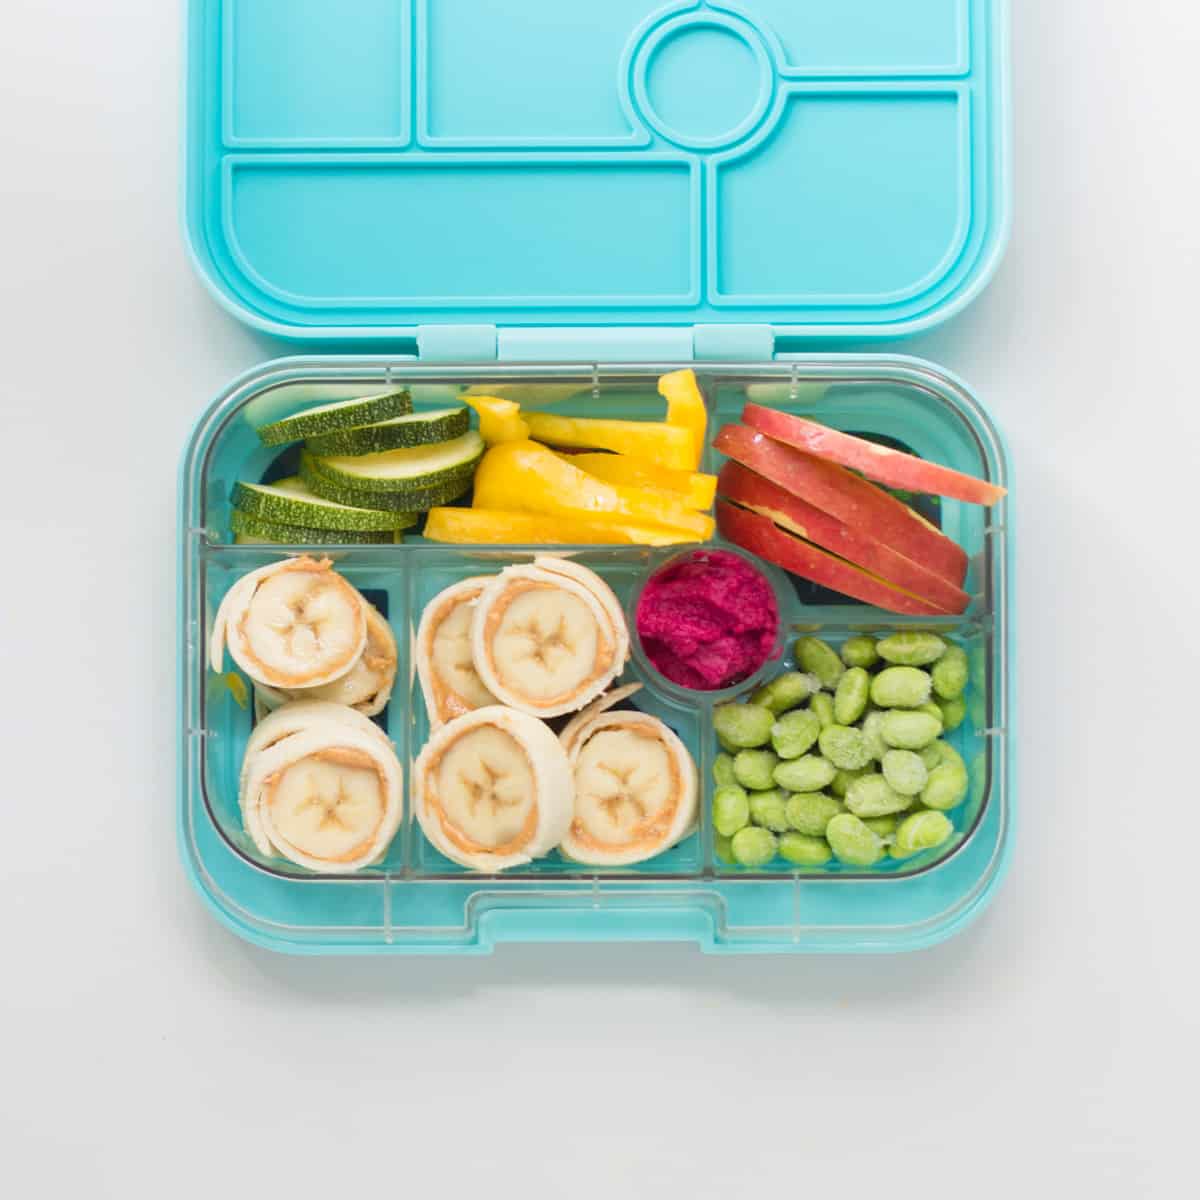 Banana sushi, edamame, apples, zucchini, bell pepper in a lunch box.